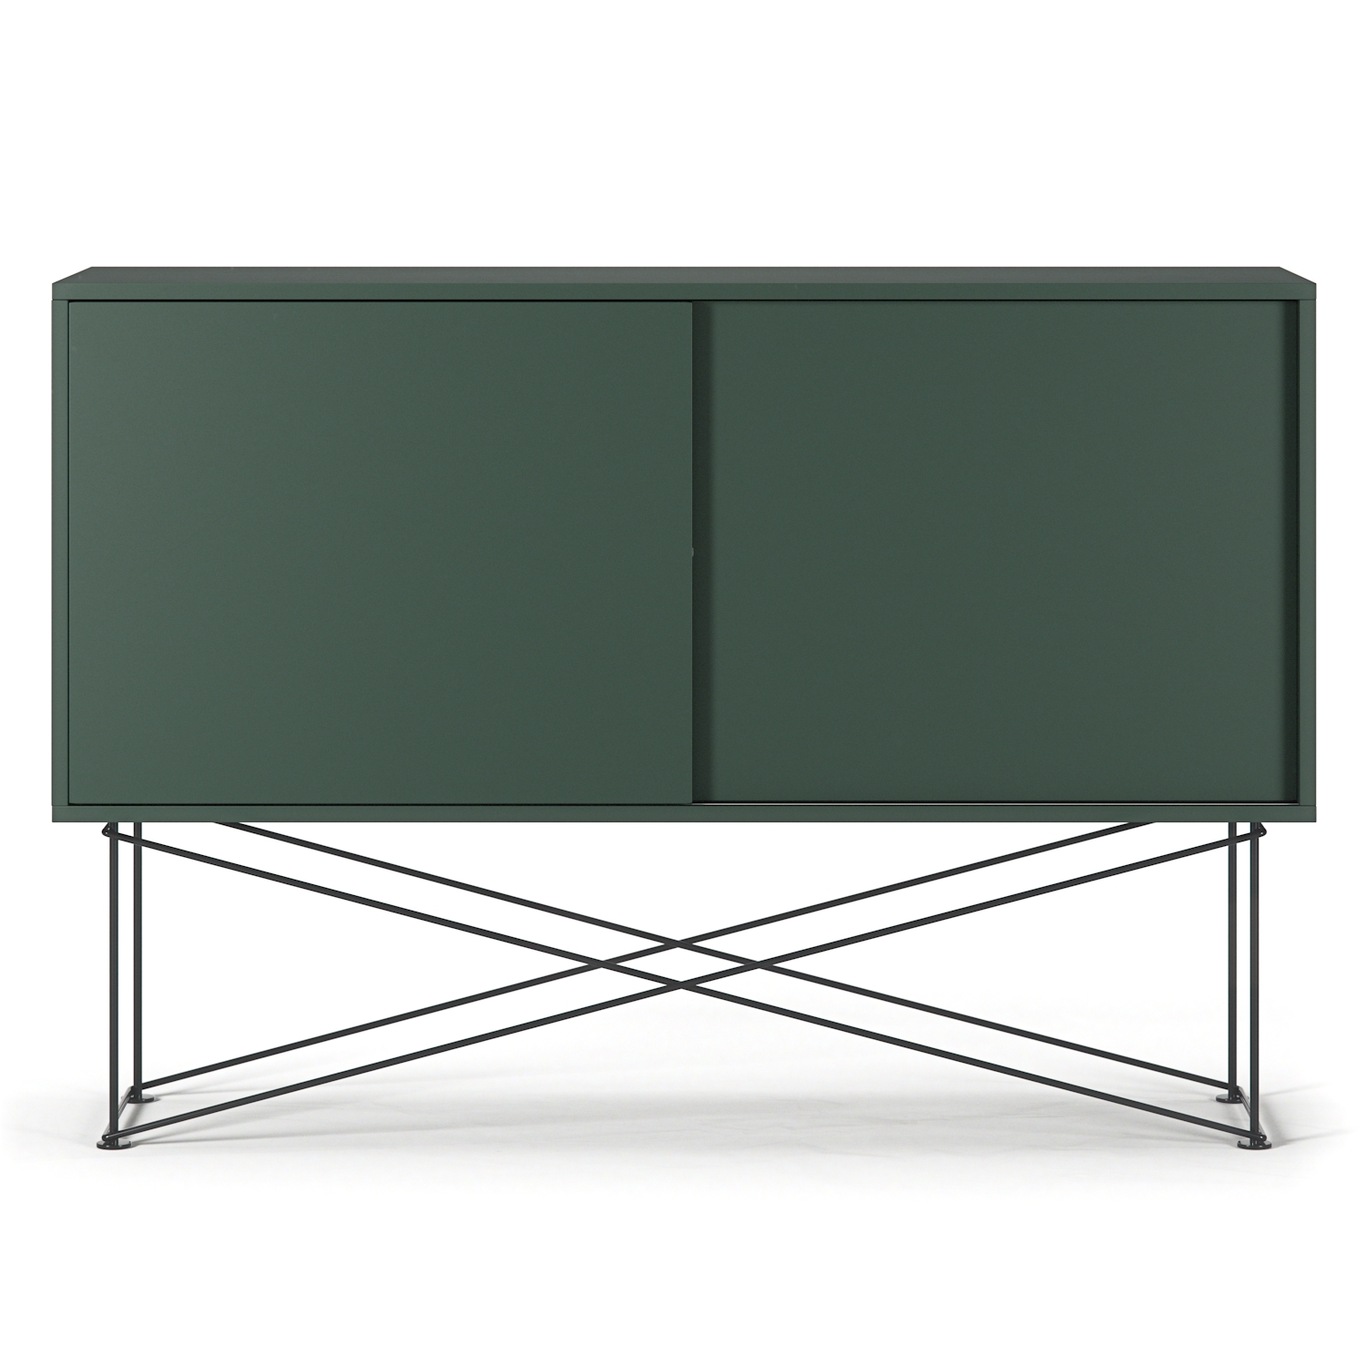 Vogue Sideboard With Stand 136 cm, Green / Black